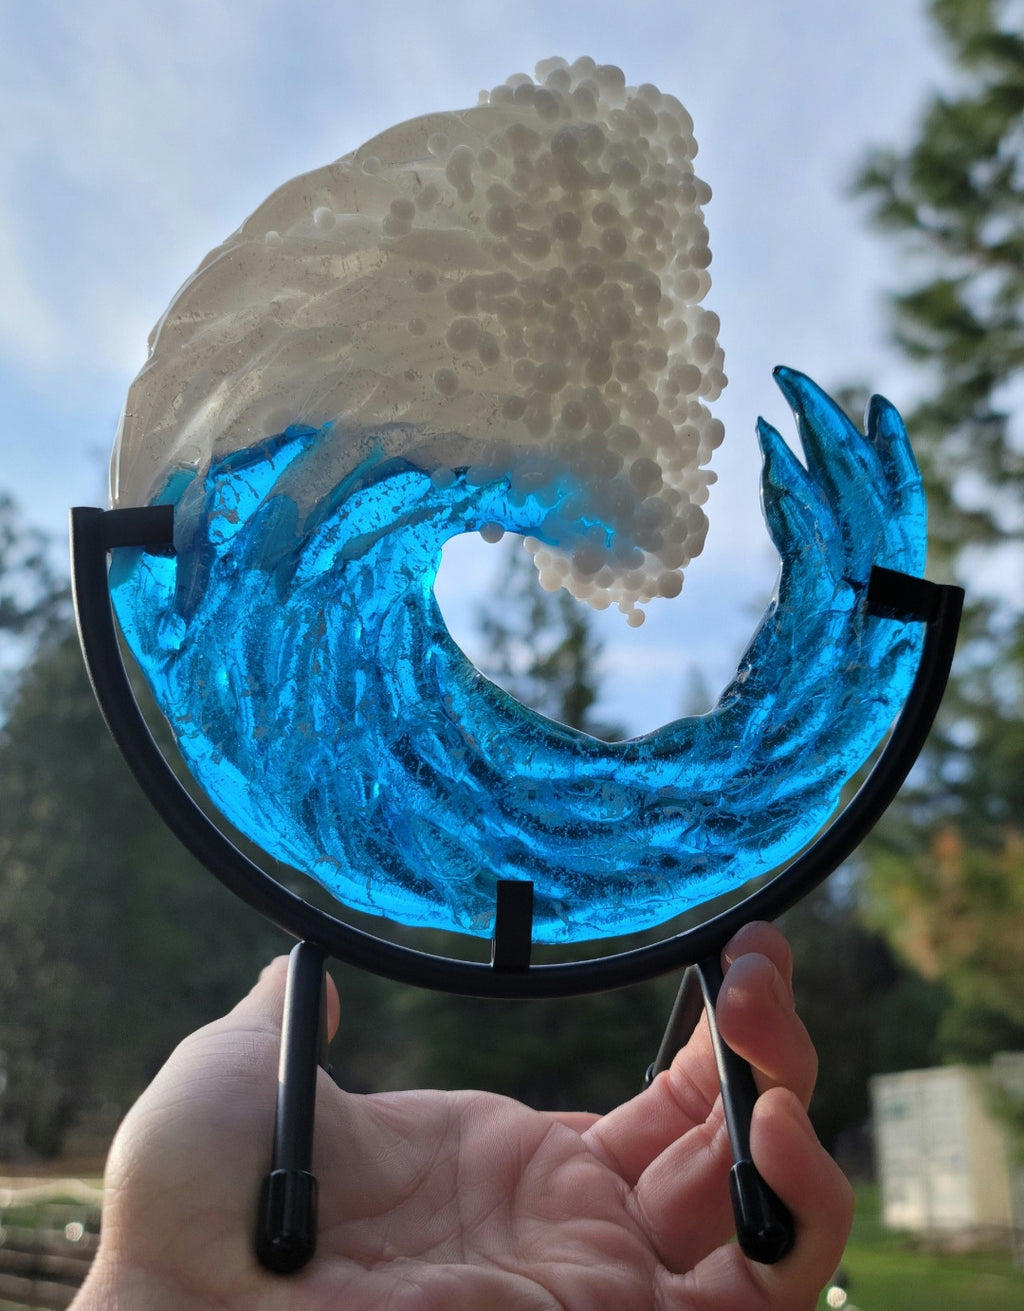 Ashes InFused Glass Cremation Art 3D Ocean Wave Sculpture 5" 6" 8" 10" 12"